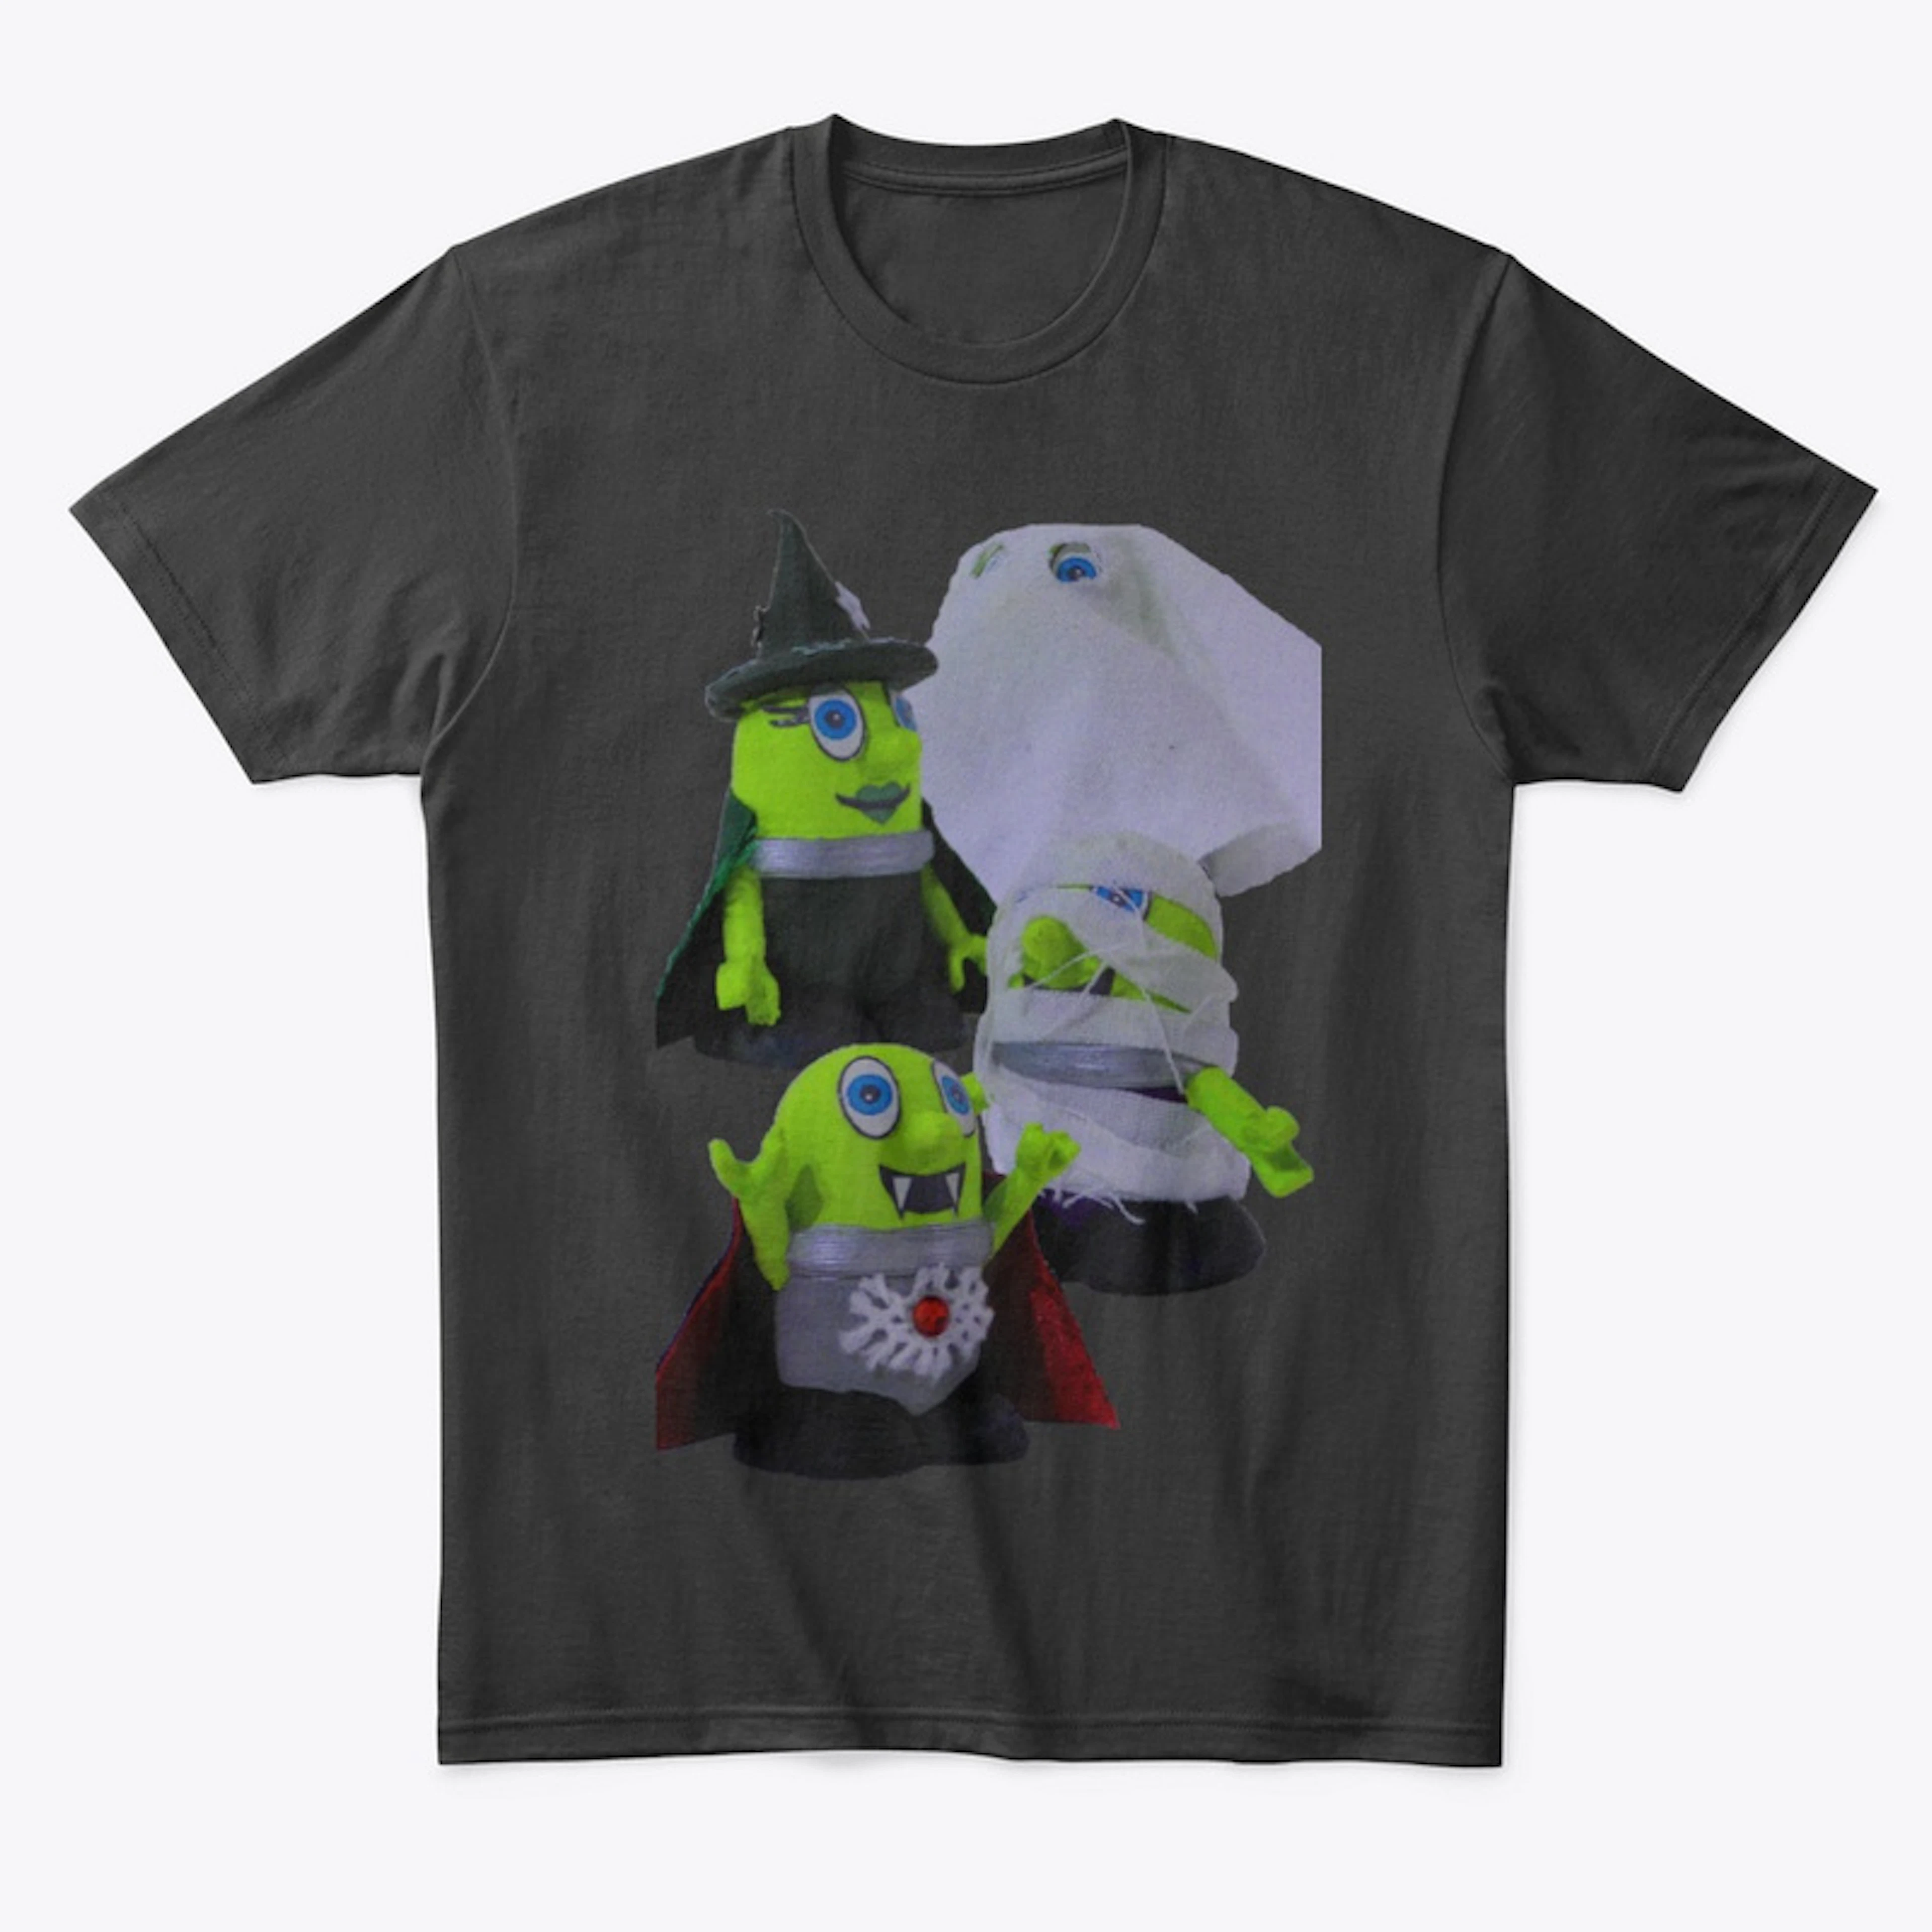 Comfort T-Shirt with 4 Spooky Funlings